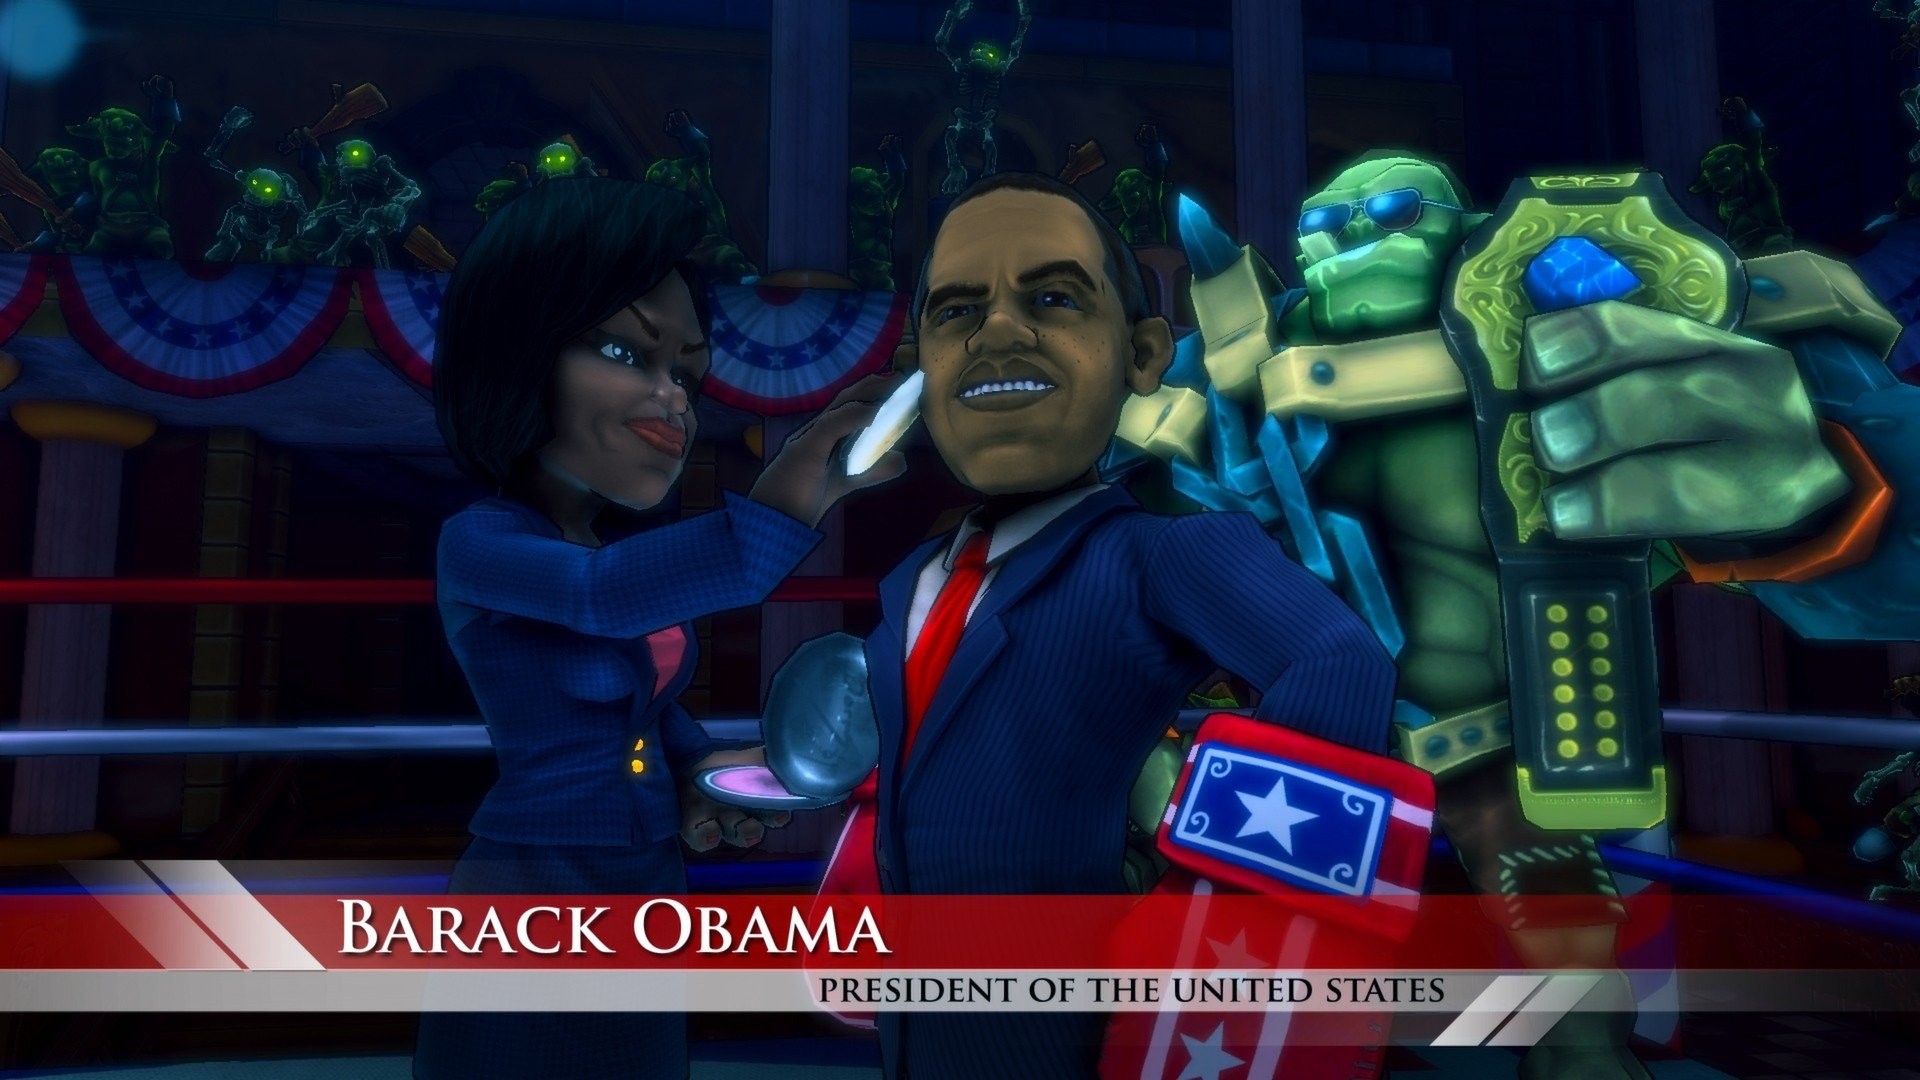 1920x1080 Video games Barack Obama Presidents of the United States Michelle Obama  Dungeon Defenders wallpaper |  | 234282 | WallpaperUP